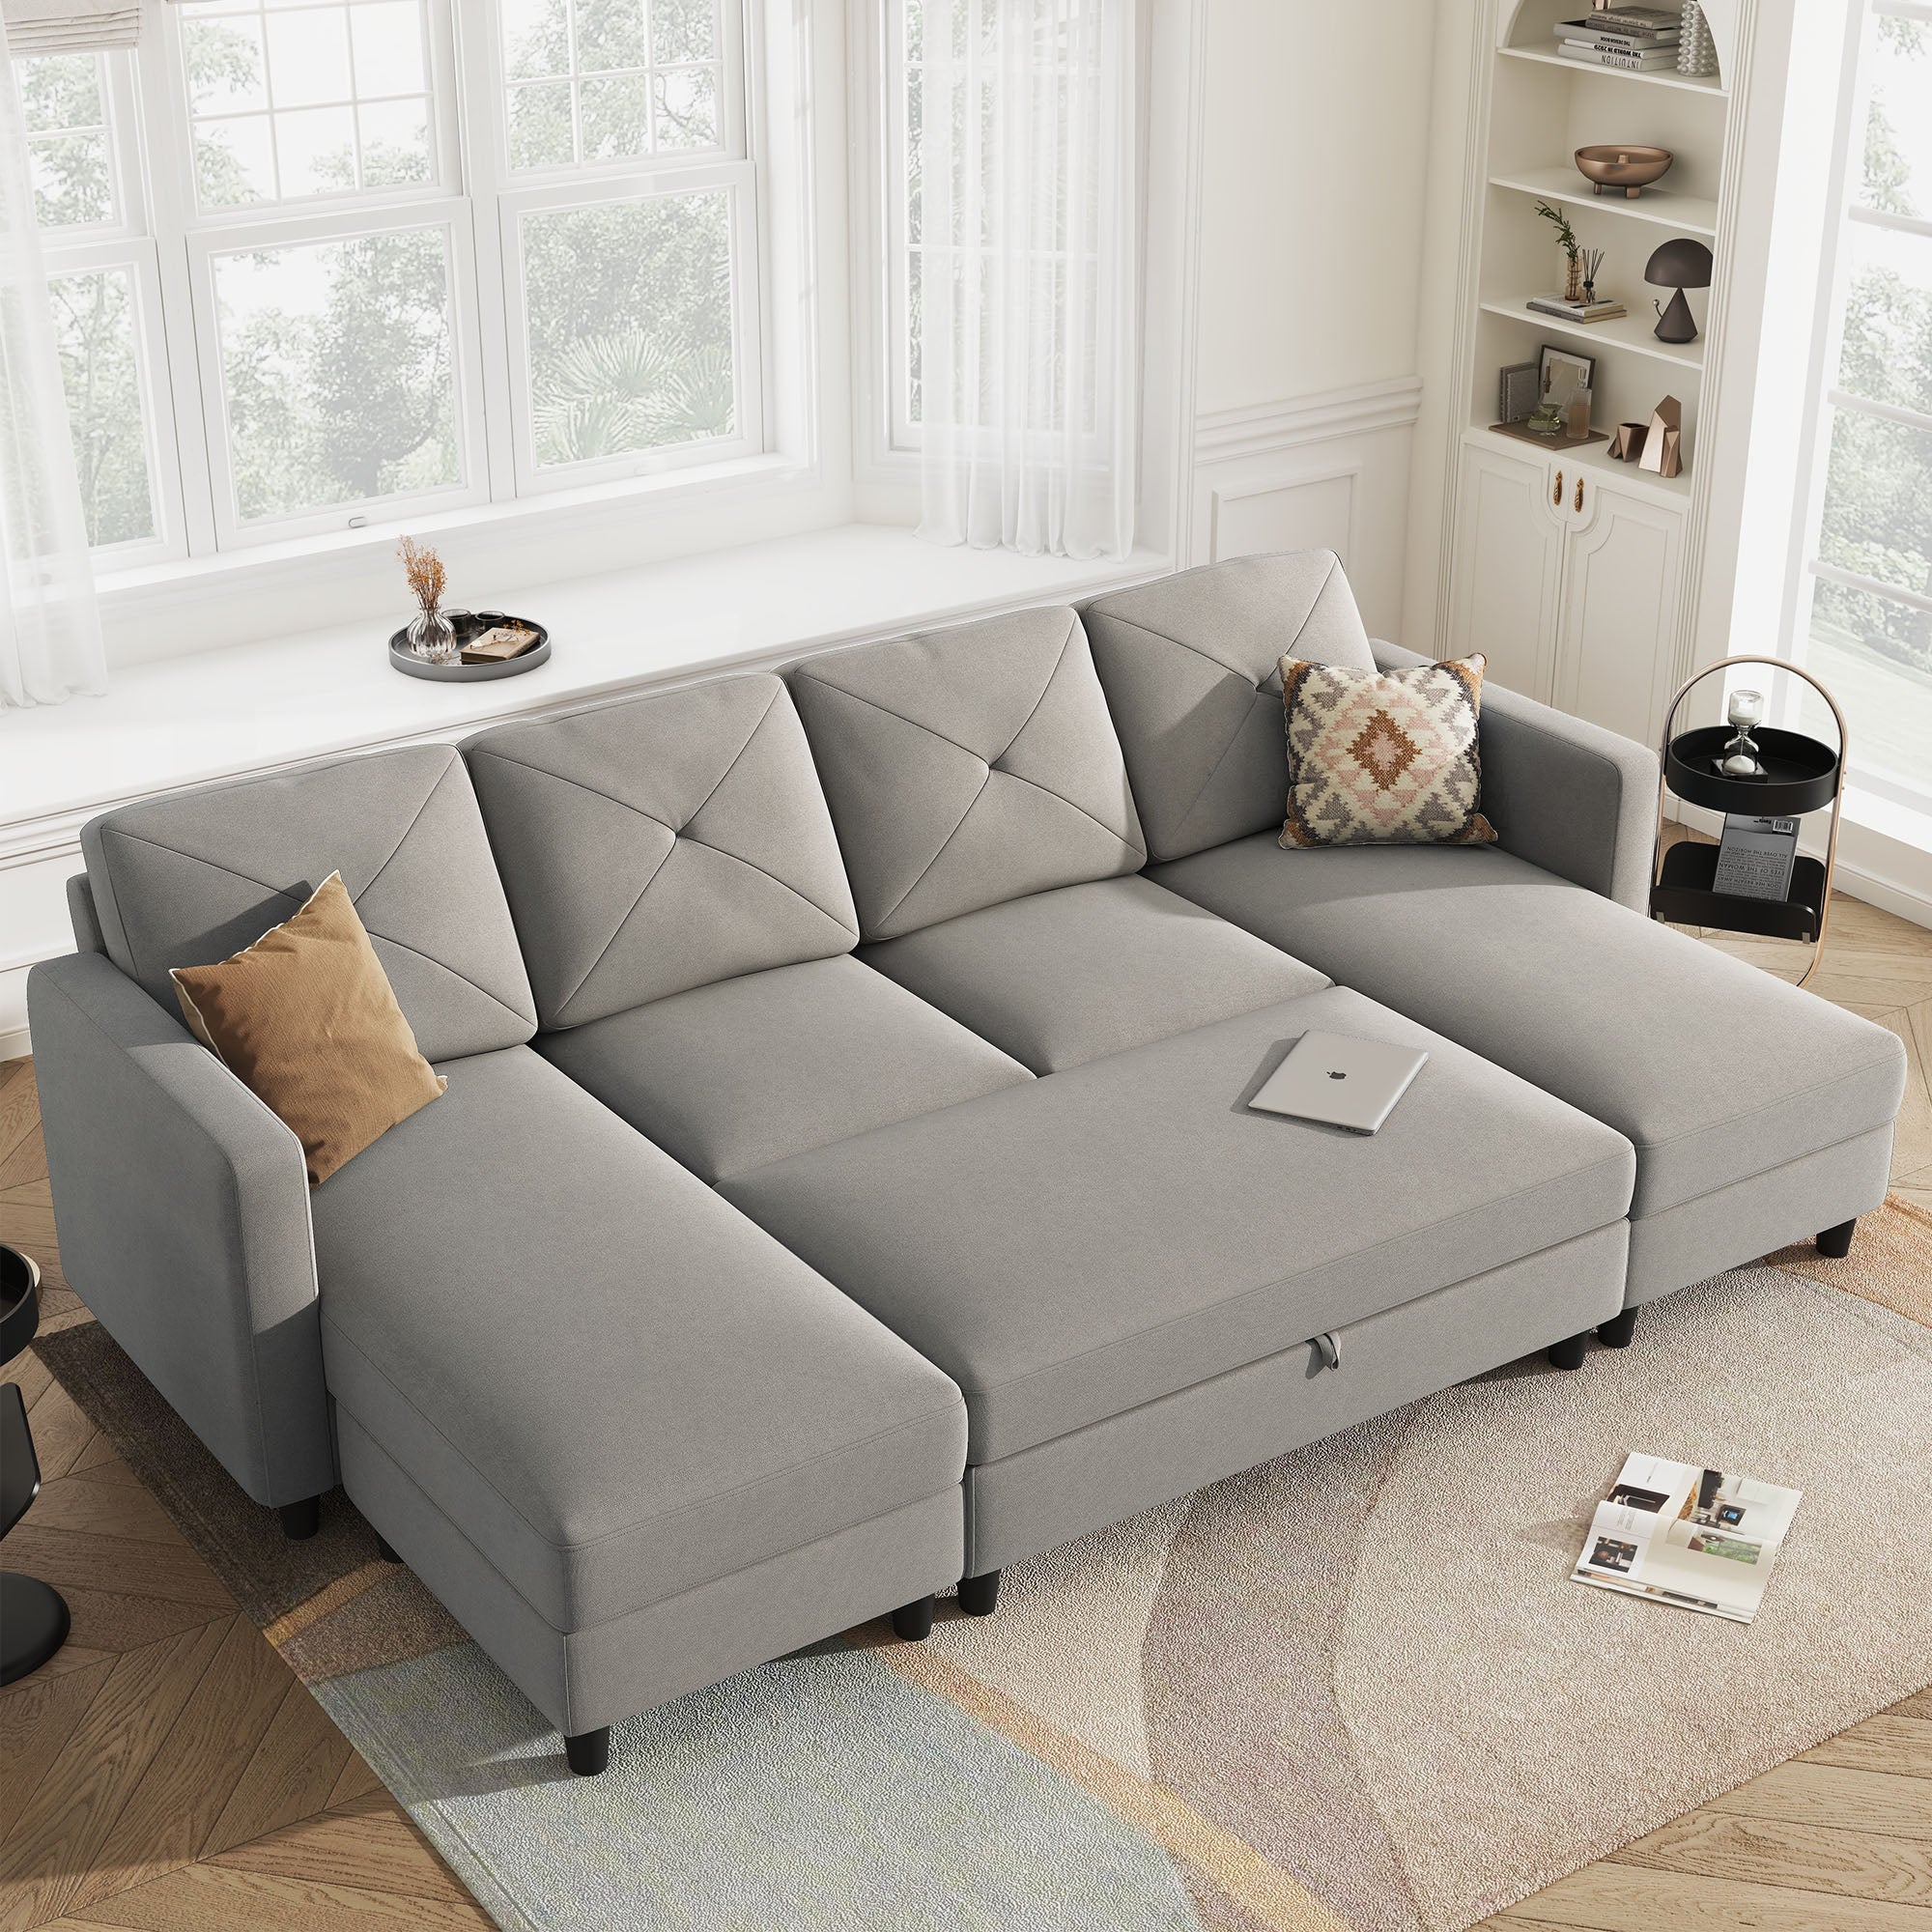 HONBAY 6-Piece Polyester Convertible Sleeper Sectional With Storage Ottoman